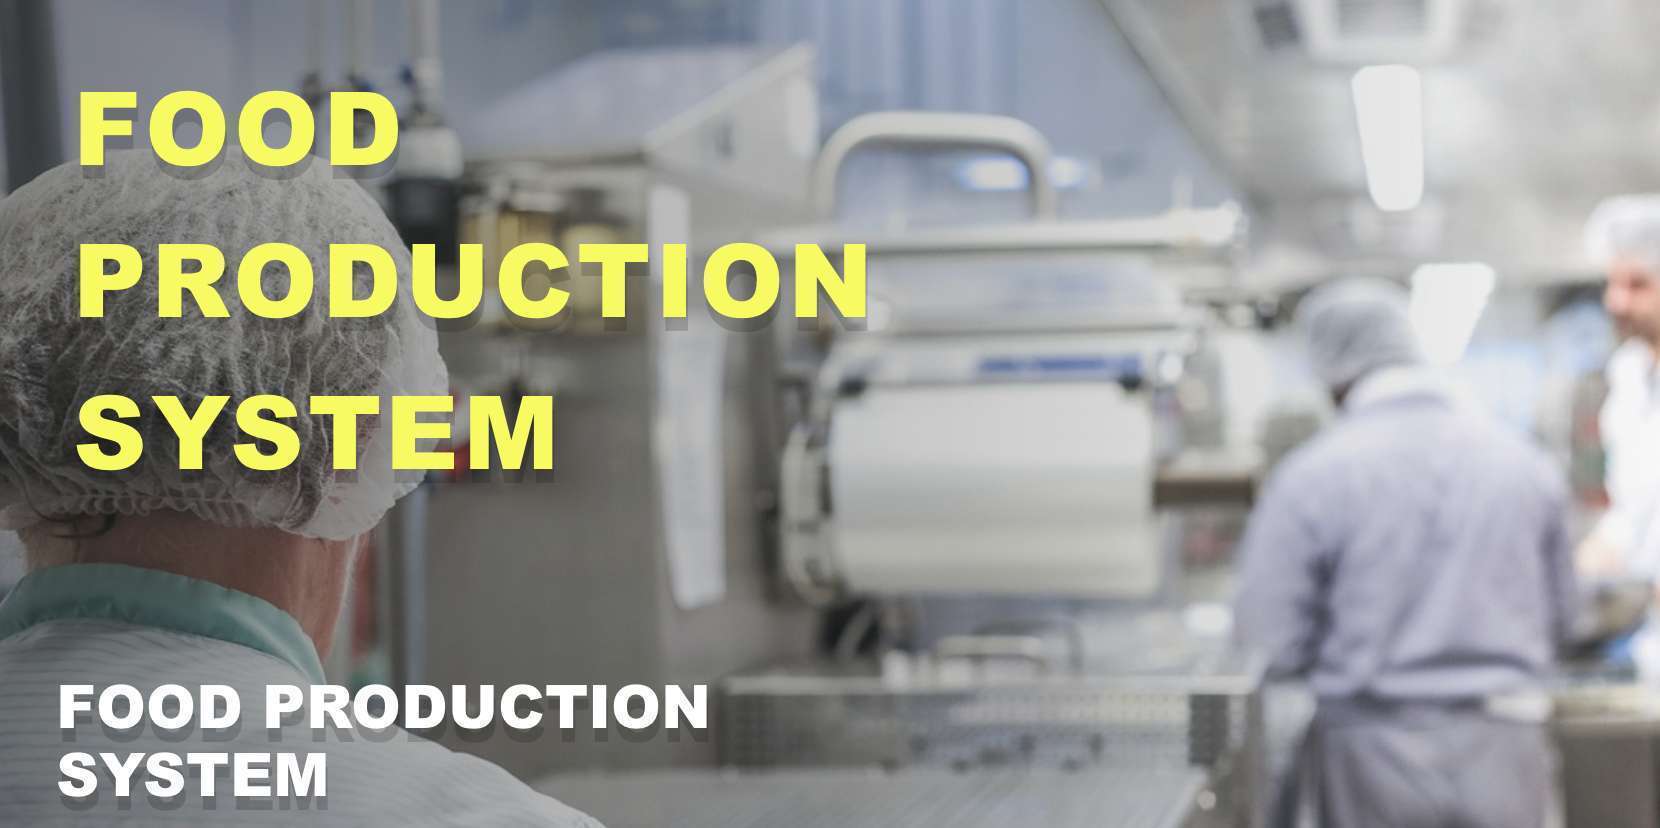 Food Production System Design and Implementation